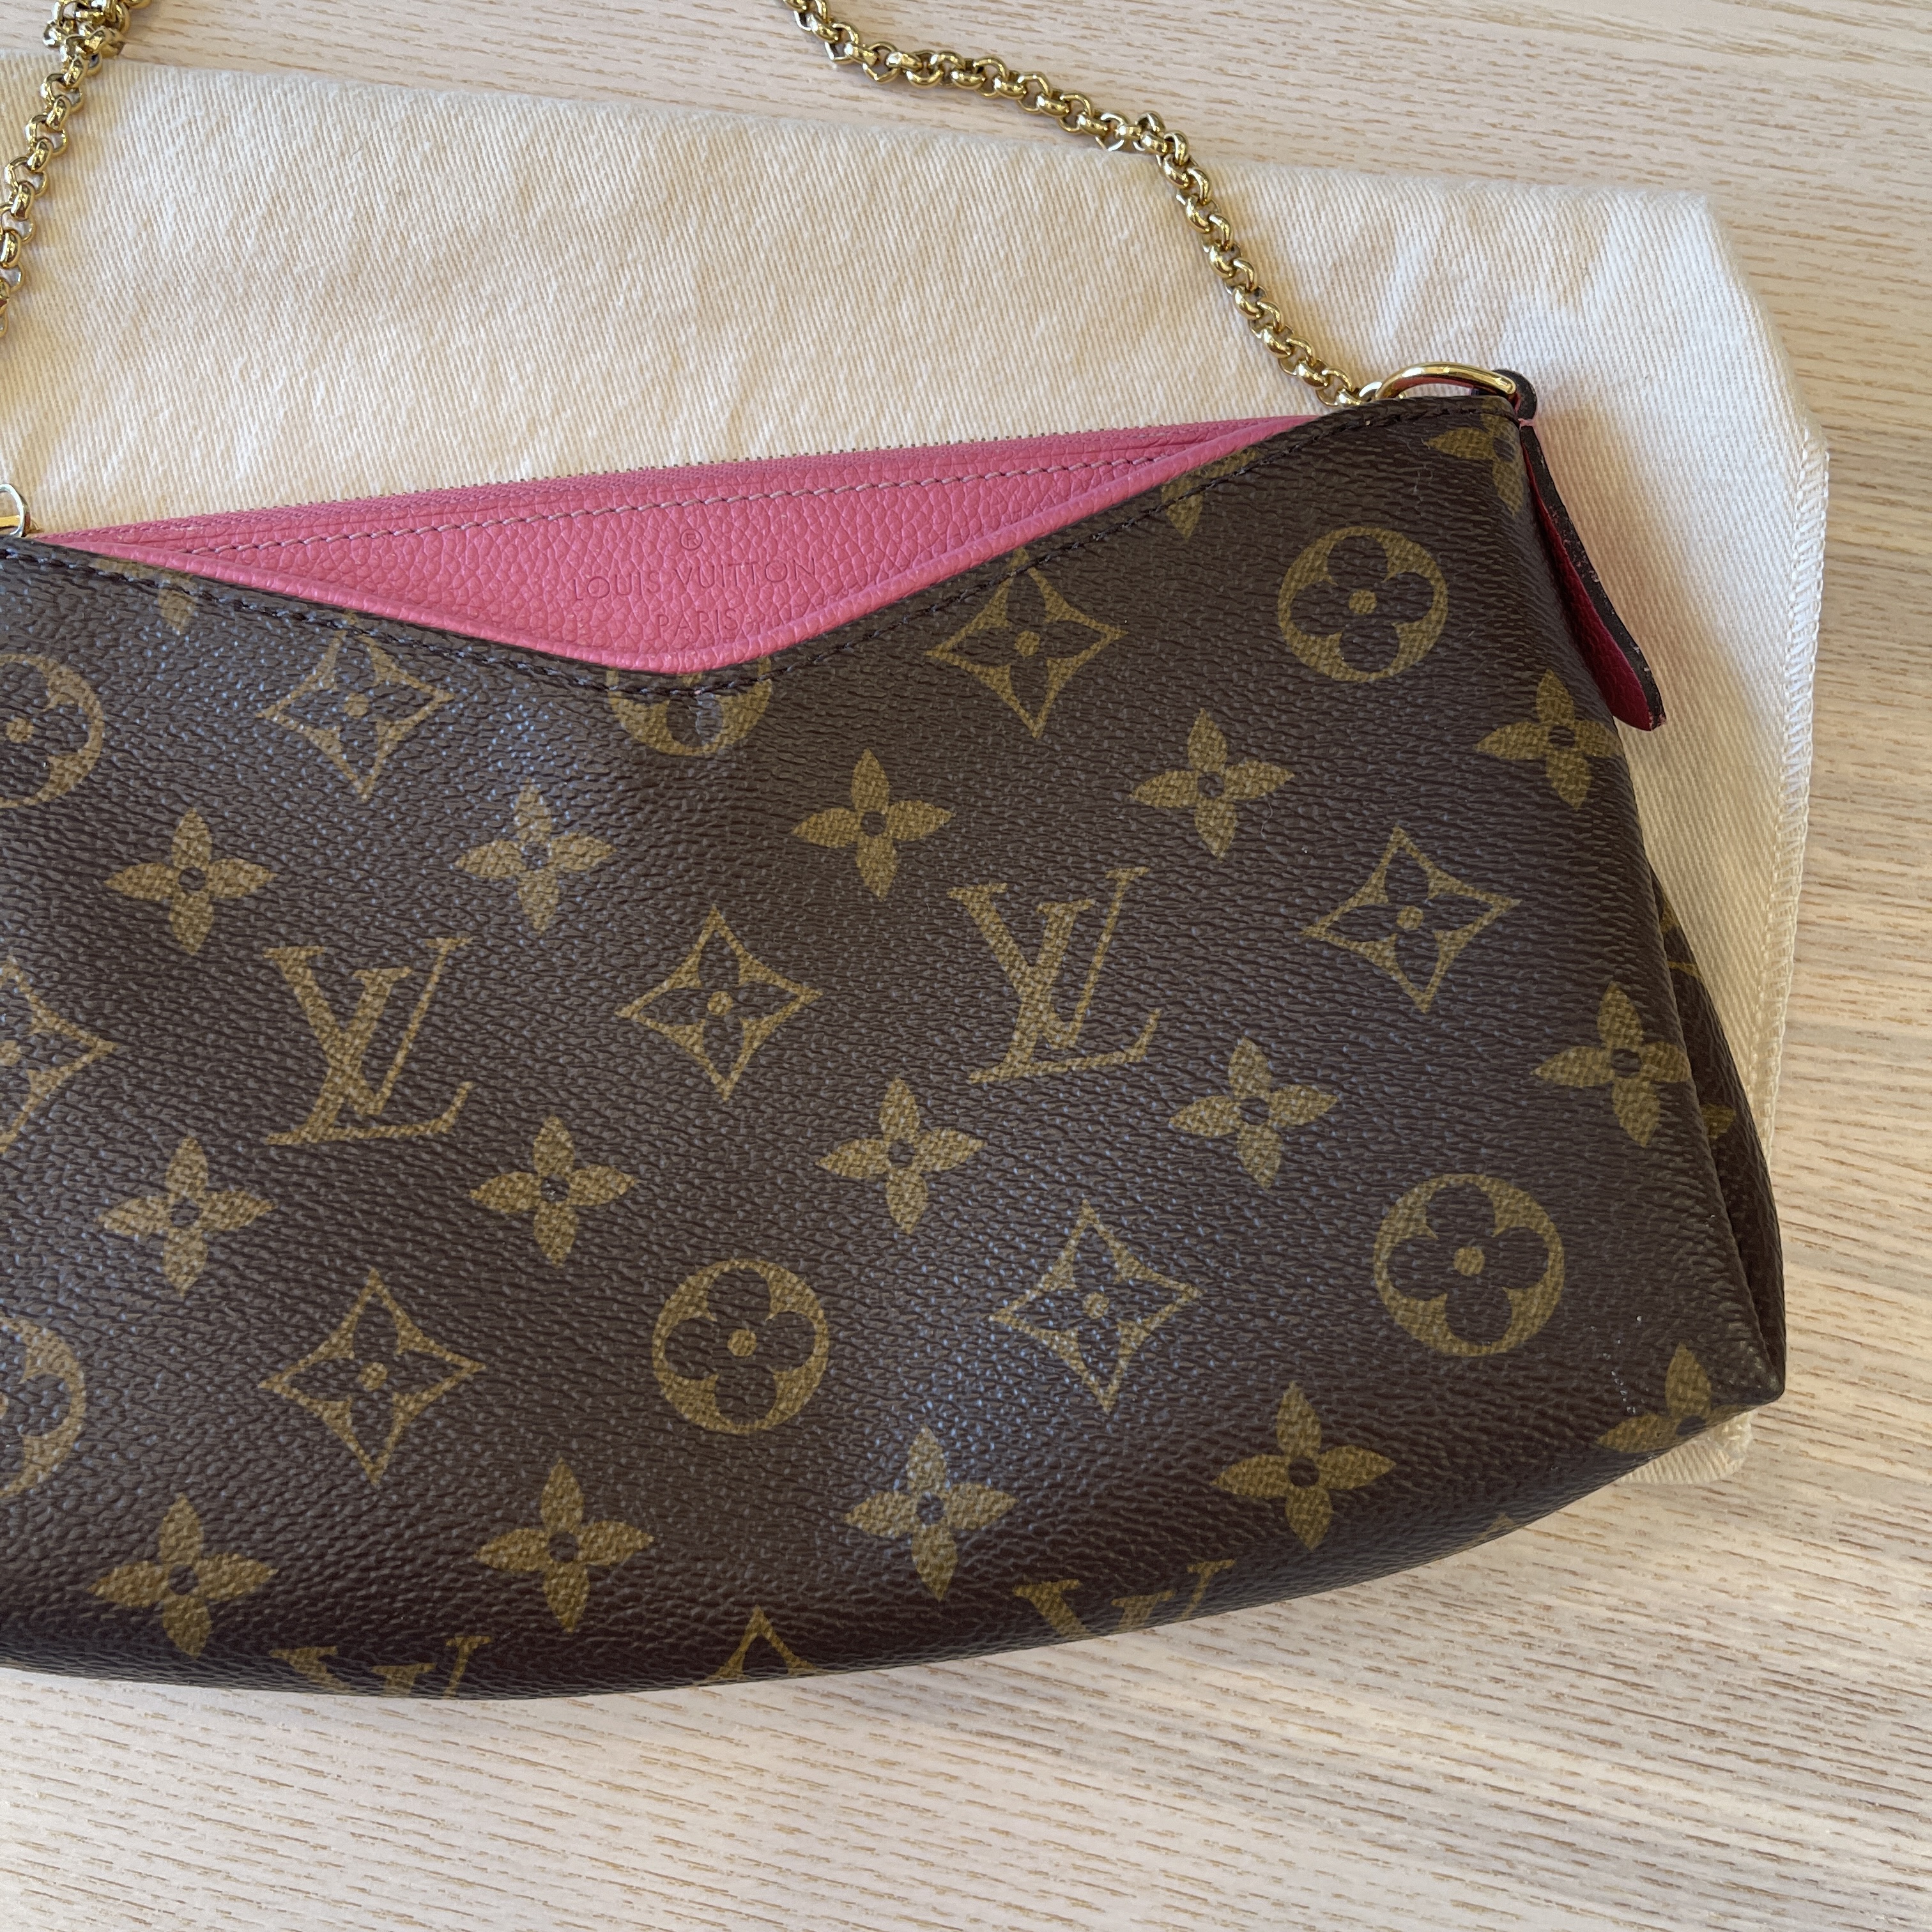 Louis Vuitton - Authenticated Pallas Clutch Bag - Leather Pink Plain For Woman, Never Worn